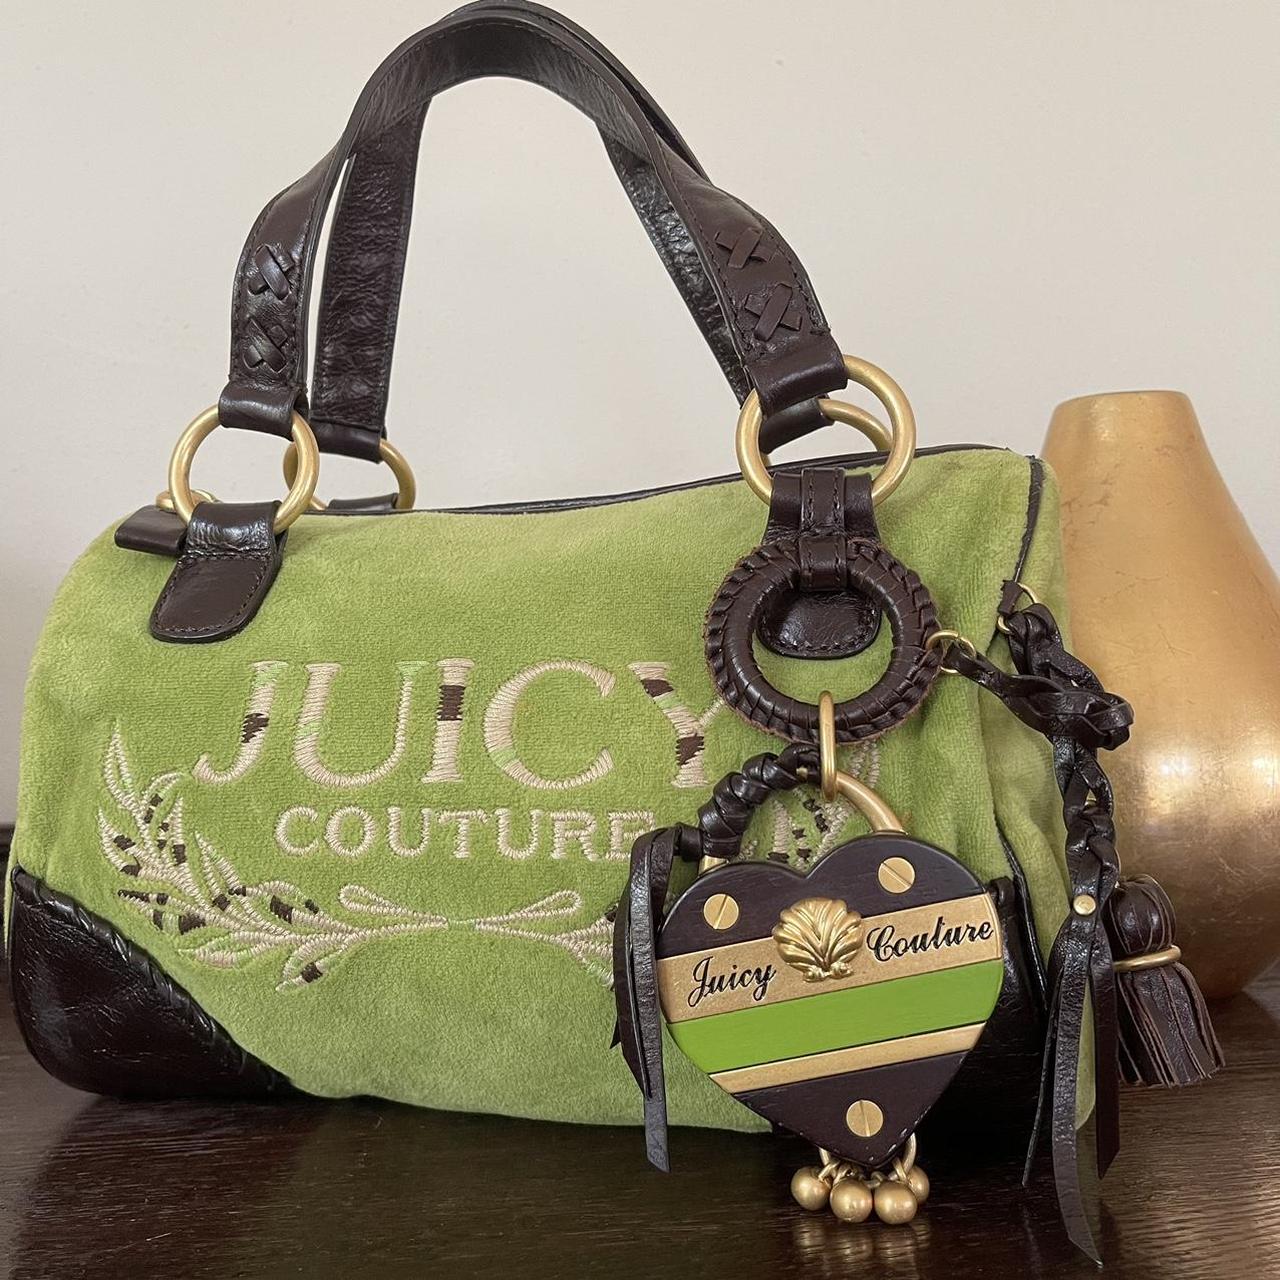 Juicy Couture Women's Green and Brown Bag | Depop